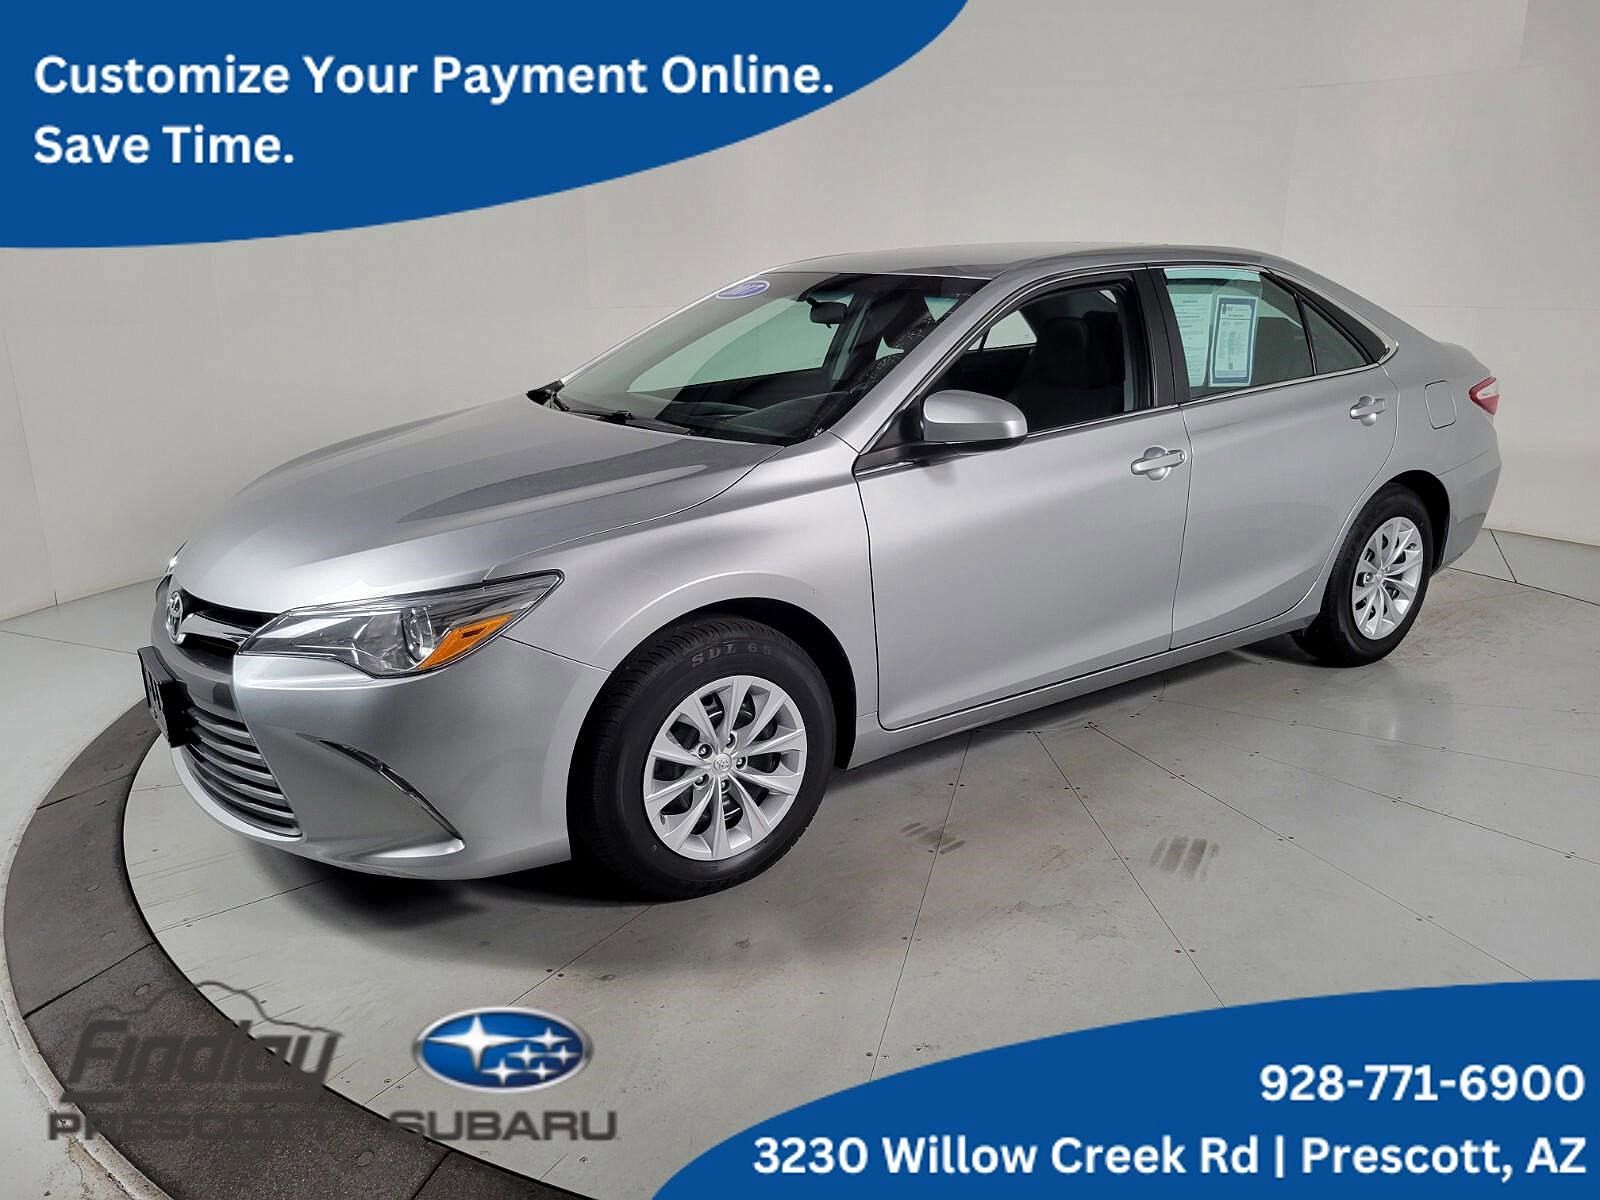 2017 Toyota Camry null image 0